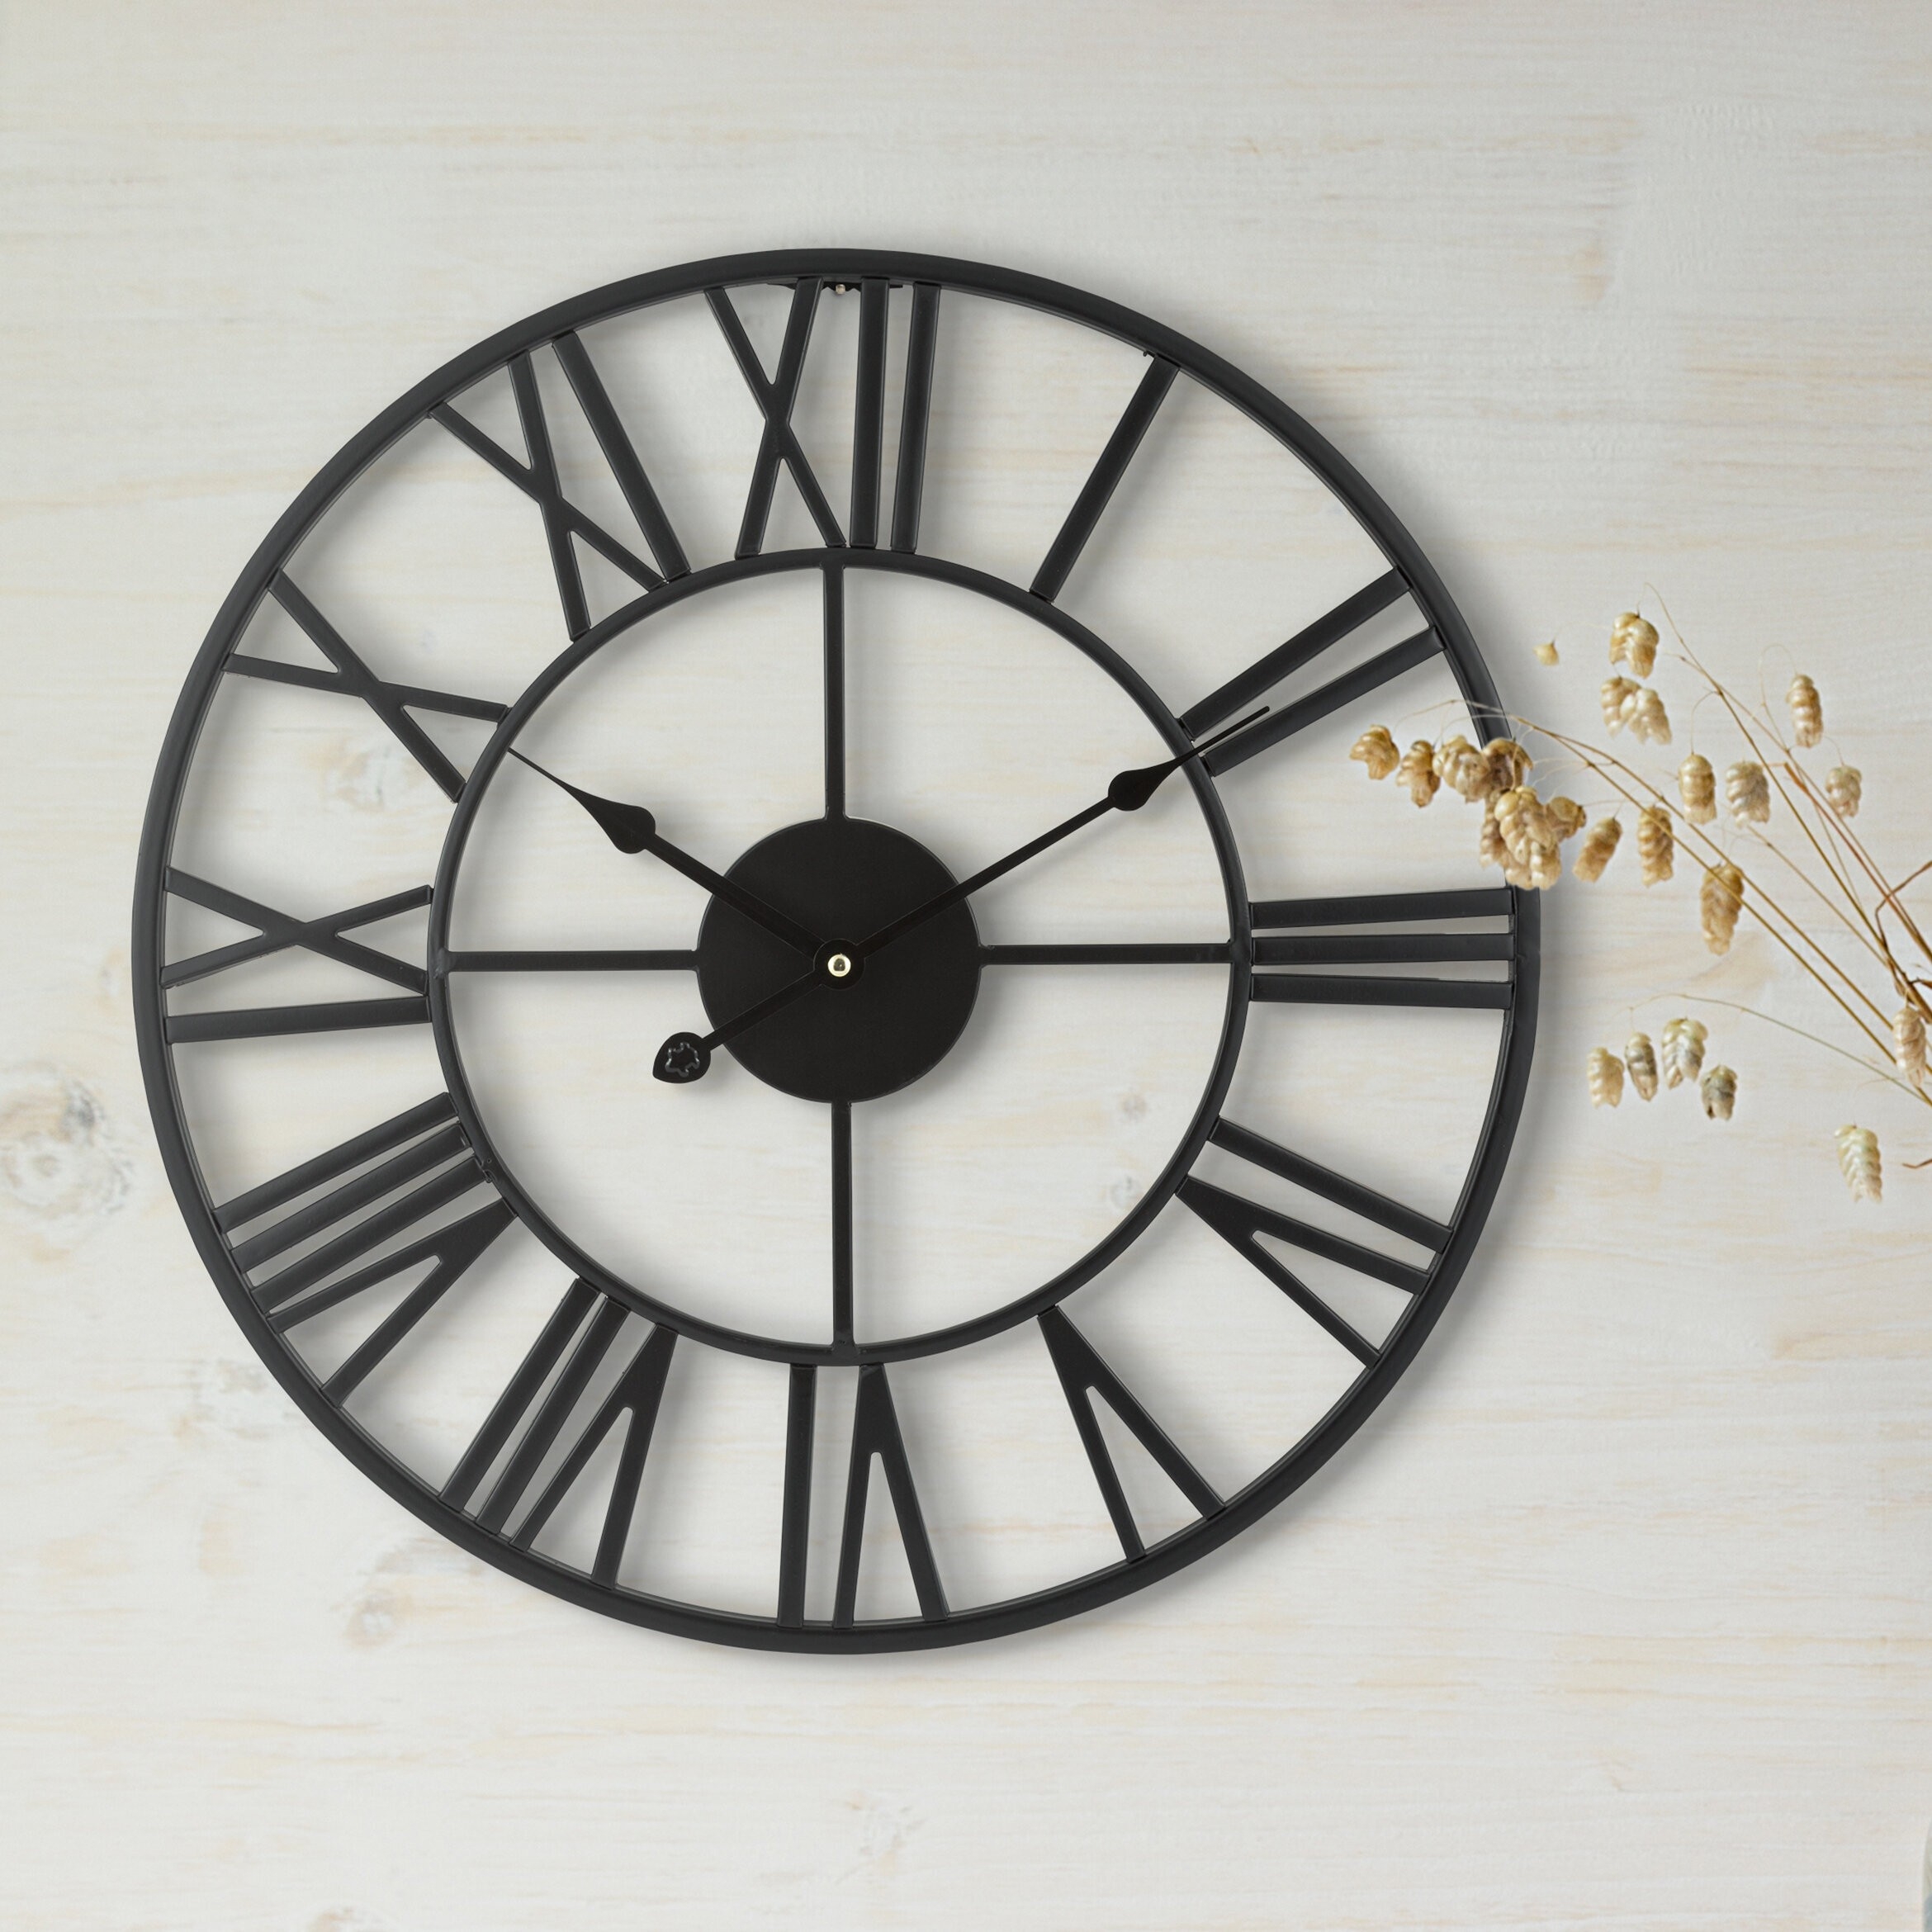 How To Choose A Wall Clock - Foter